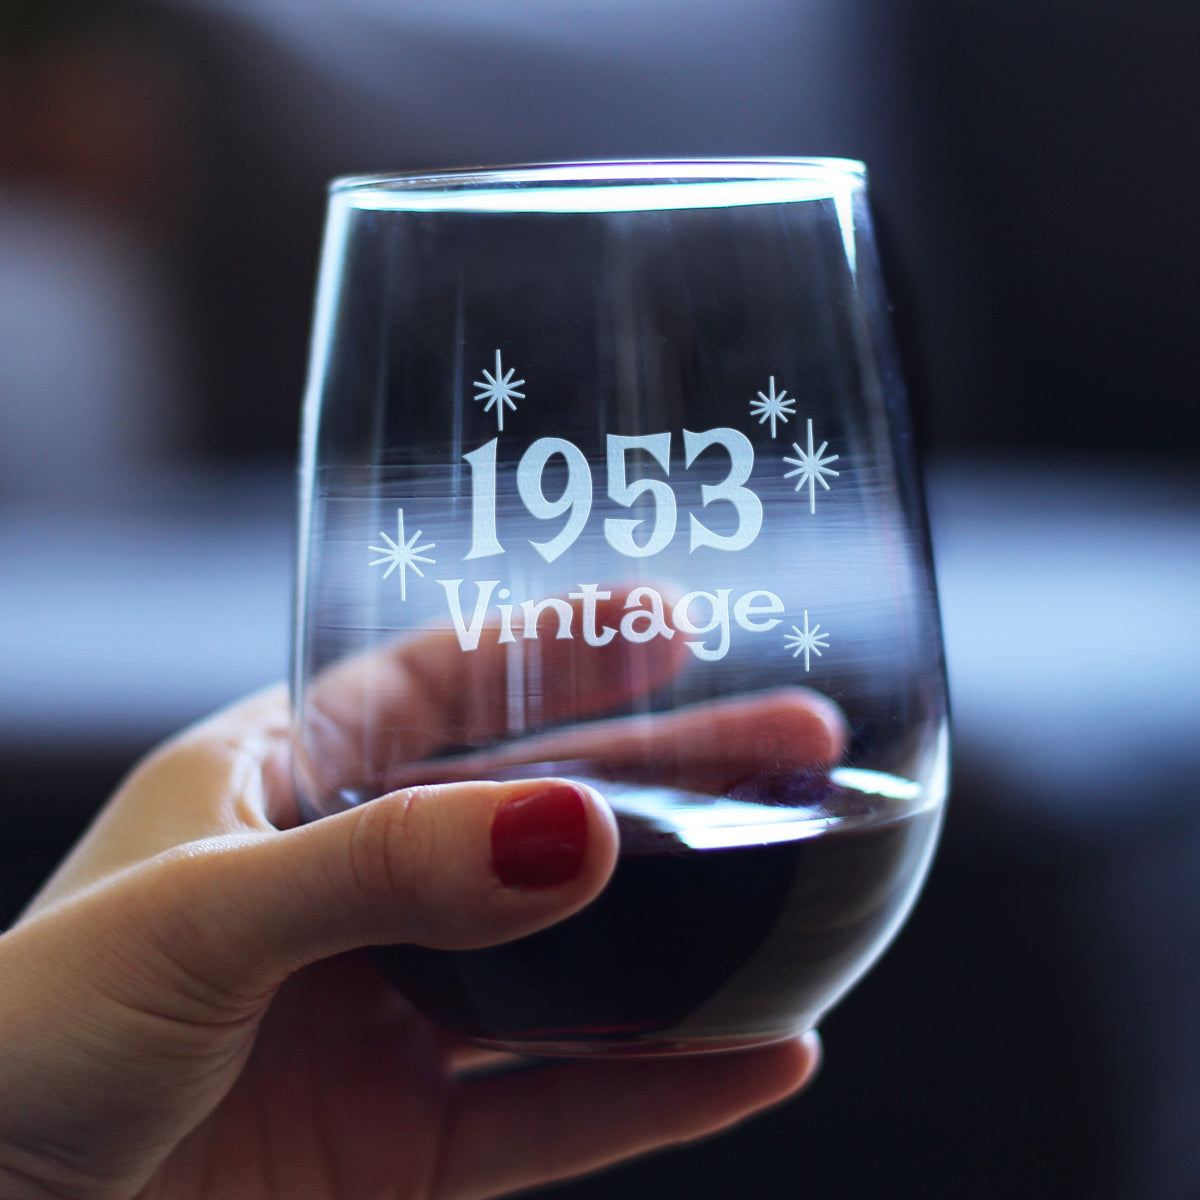 Vintage 1953-70th Birthday Stemless Wine Glass Gifts for Women &amp; Men Turning 70 - Bday Party Decor - Large Glasses